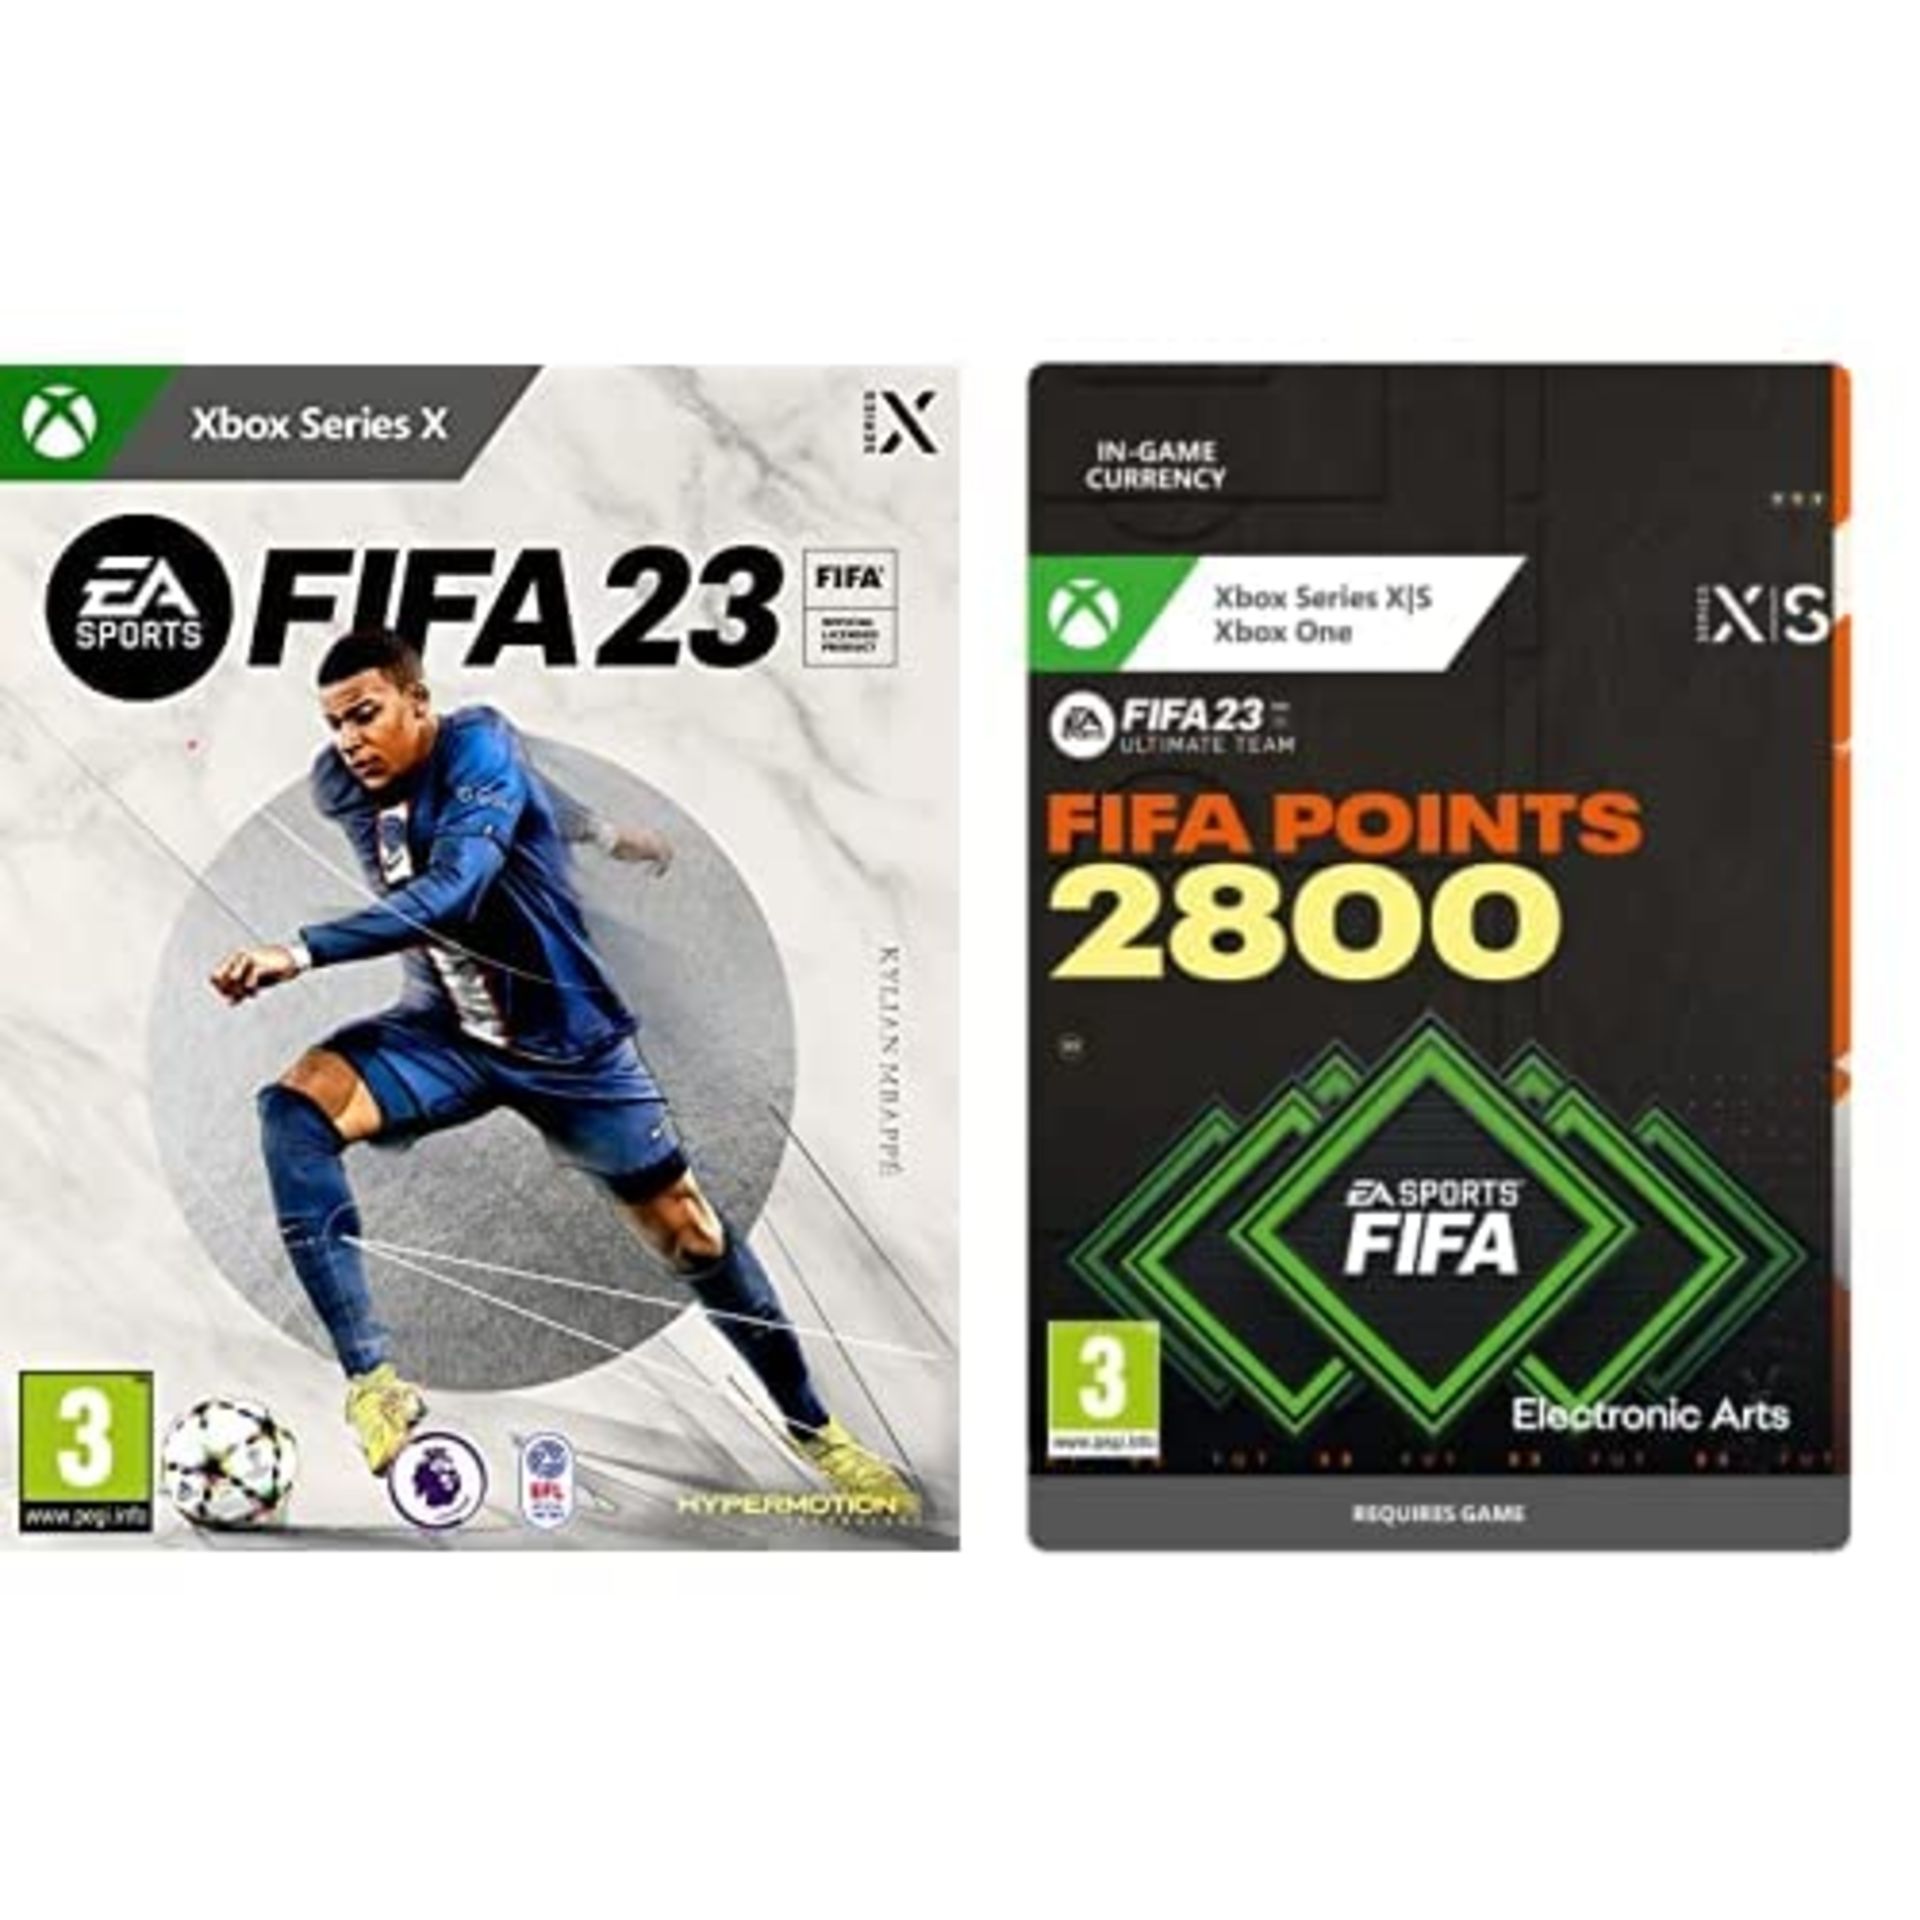 RRP £24.55 FIFA 23 Standard Edition XBOX X | English,Cover might different (color/design)